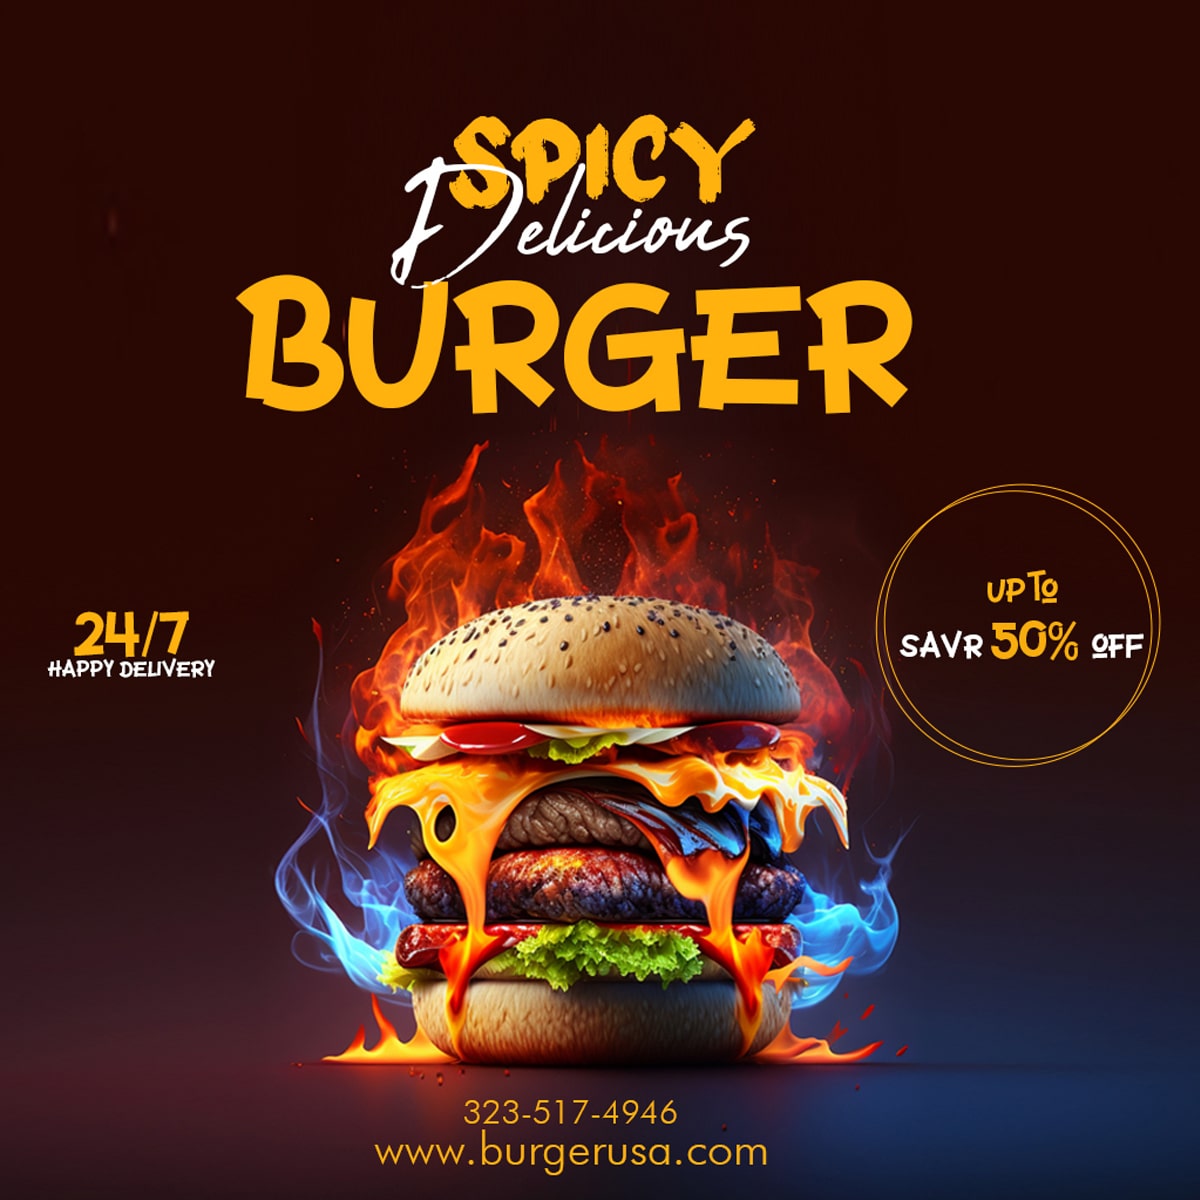 Hot Juicy Burger with Cheese, Social Media Post preview image.